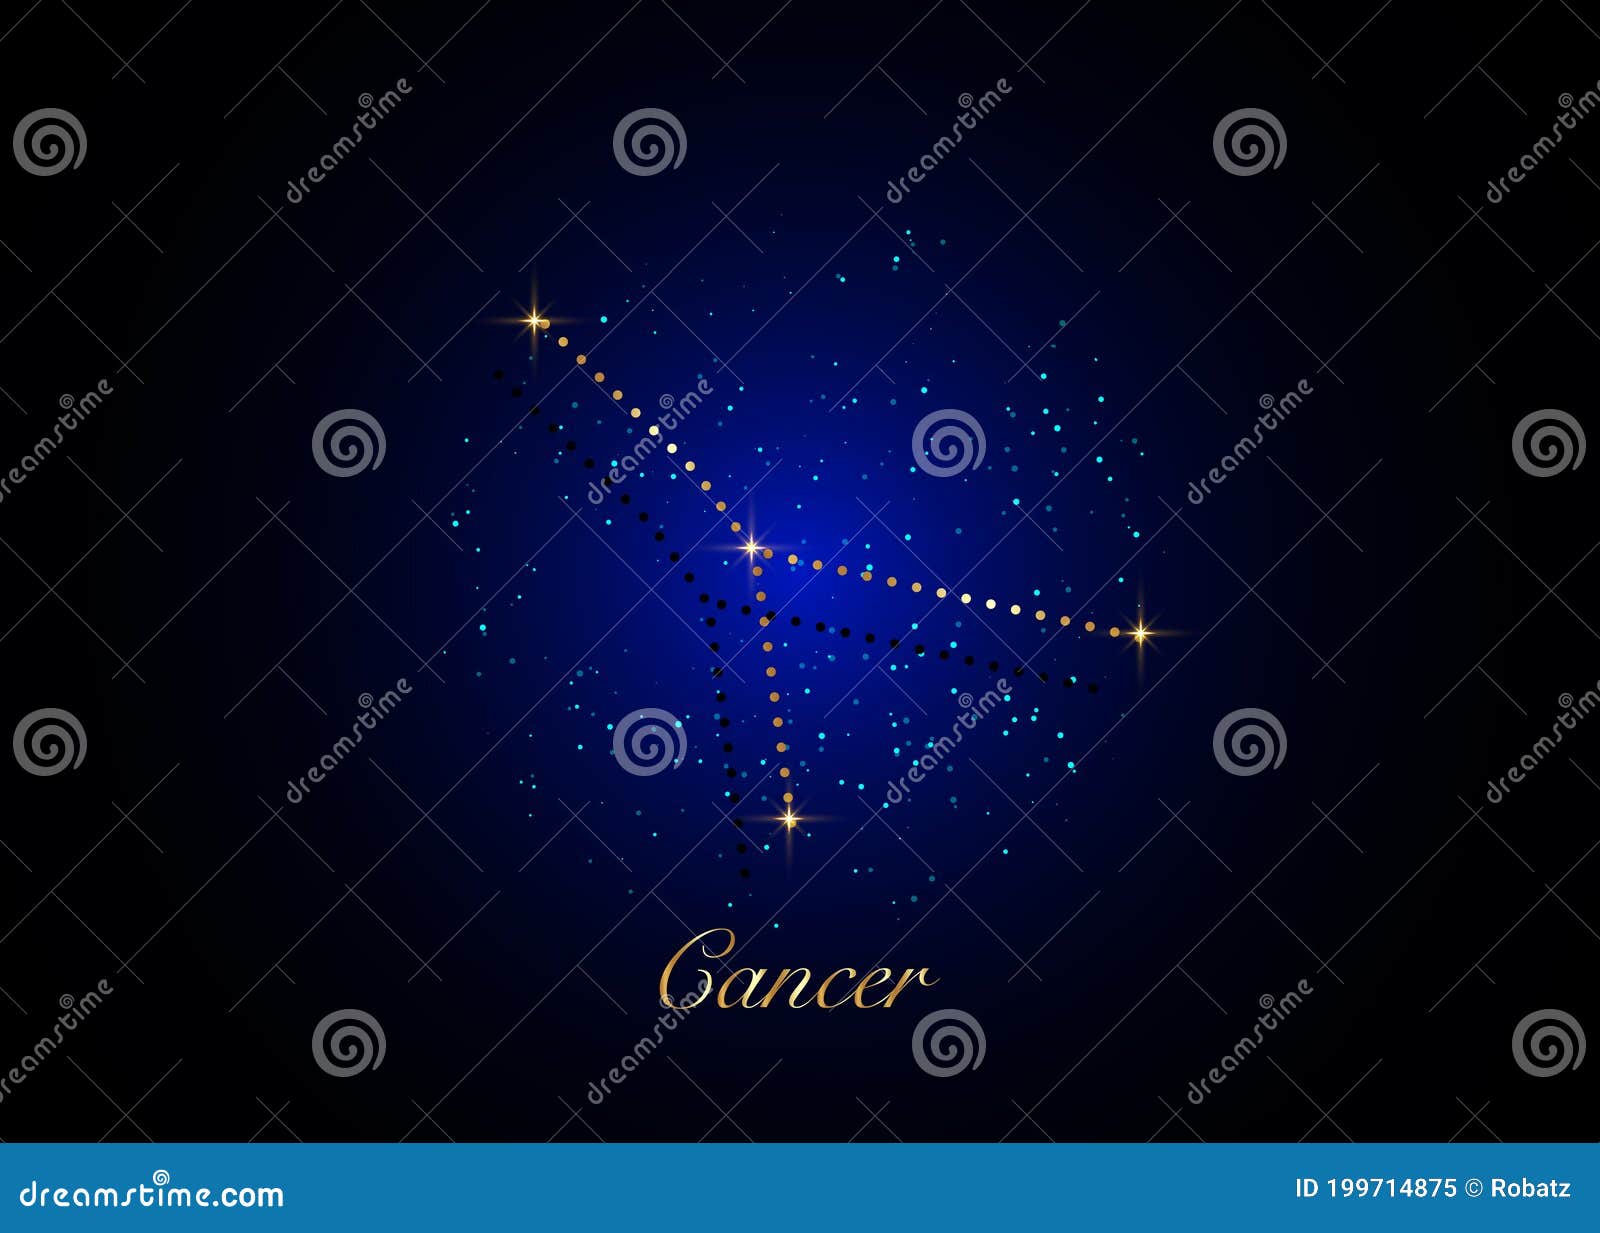 Cancer Zodiac Constellations Sign On Beautiful Starry Sky With Galaxy